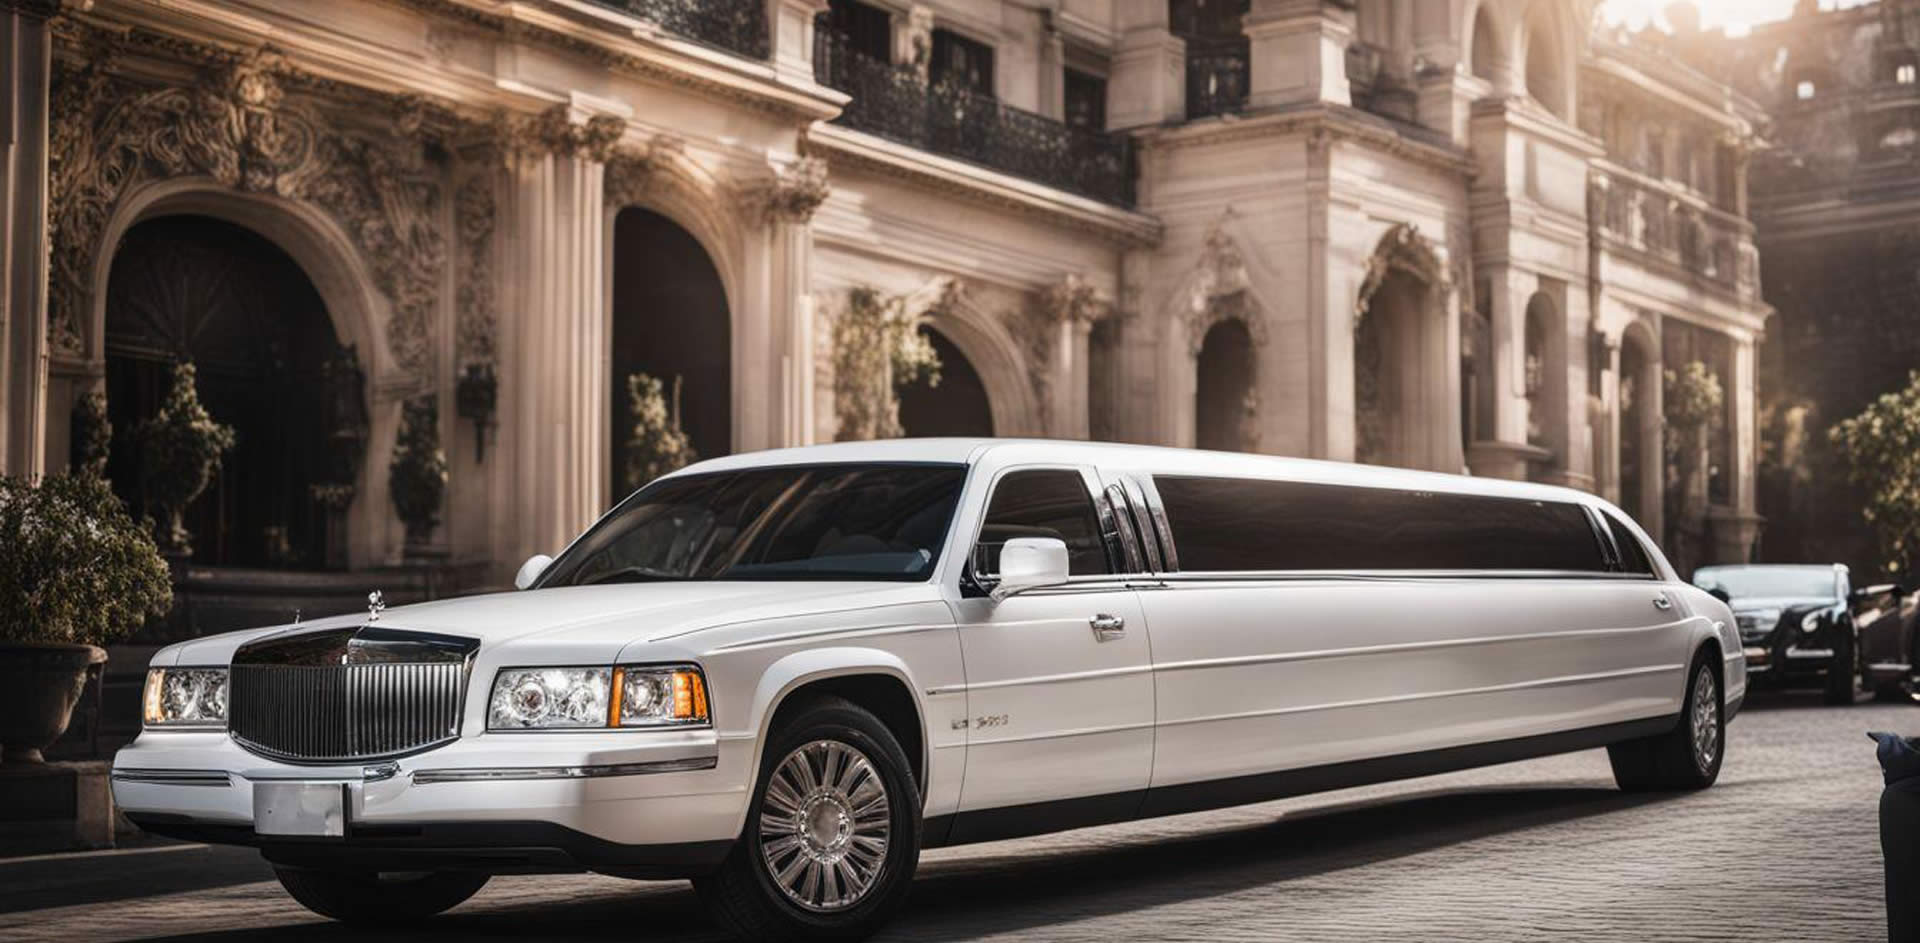 A white limousine parked in front of a building